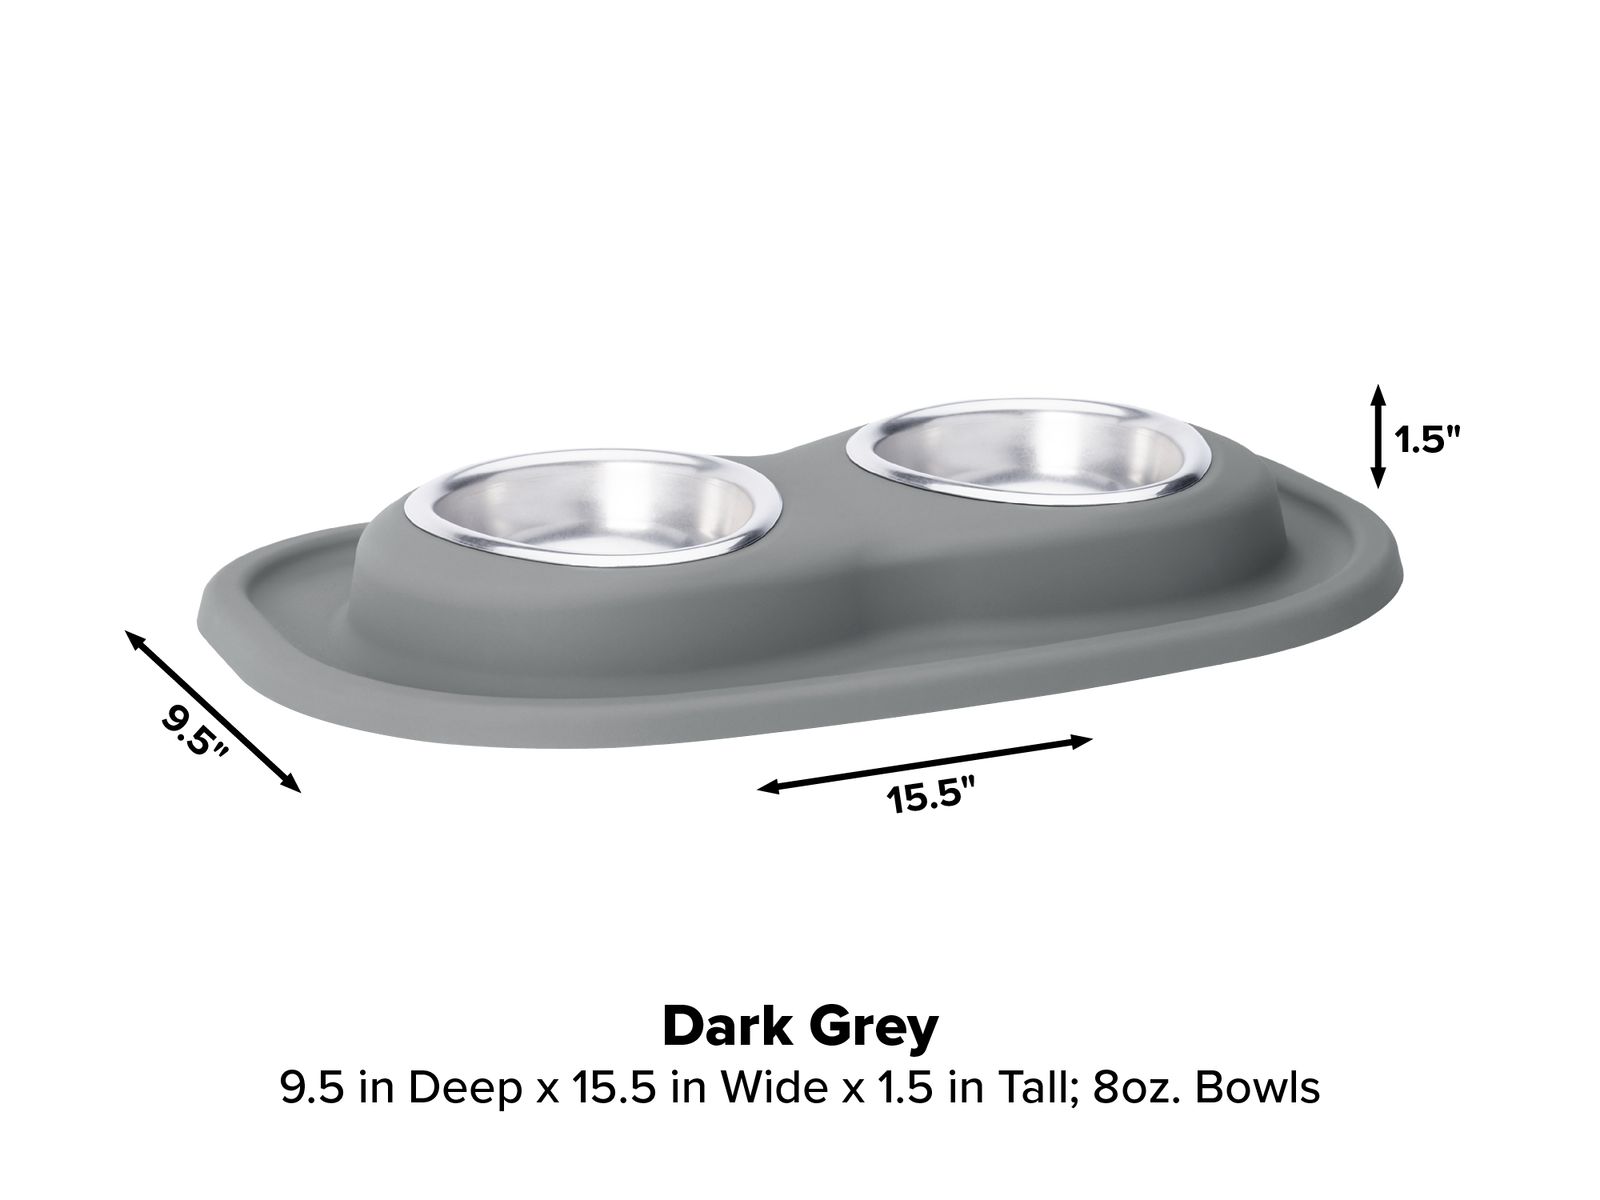 WeatherTech Double High Pet Feeding System - Elevated Dog/Cat Bowls - 14  inch High Dark Grey (DHC9614DGDG)